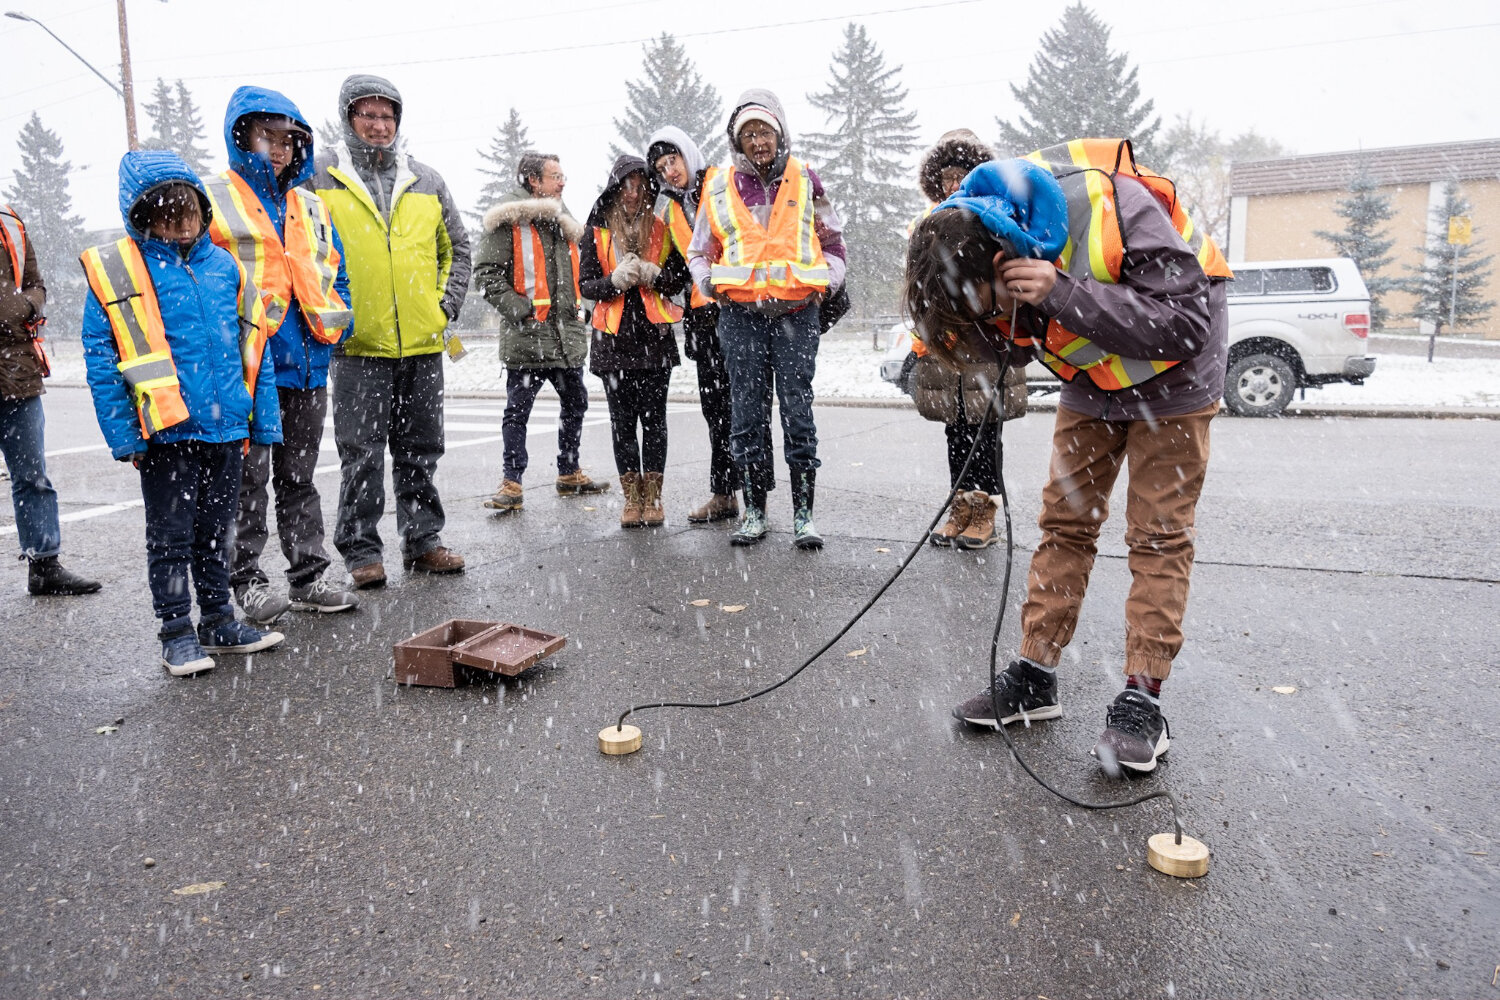  Participants of Becky Shaw's guided tour utilized a geophone to listen to running water deep beneath the city streets.   Photo by Jeffrey Heyden-Kaye 